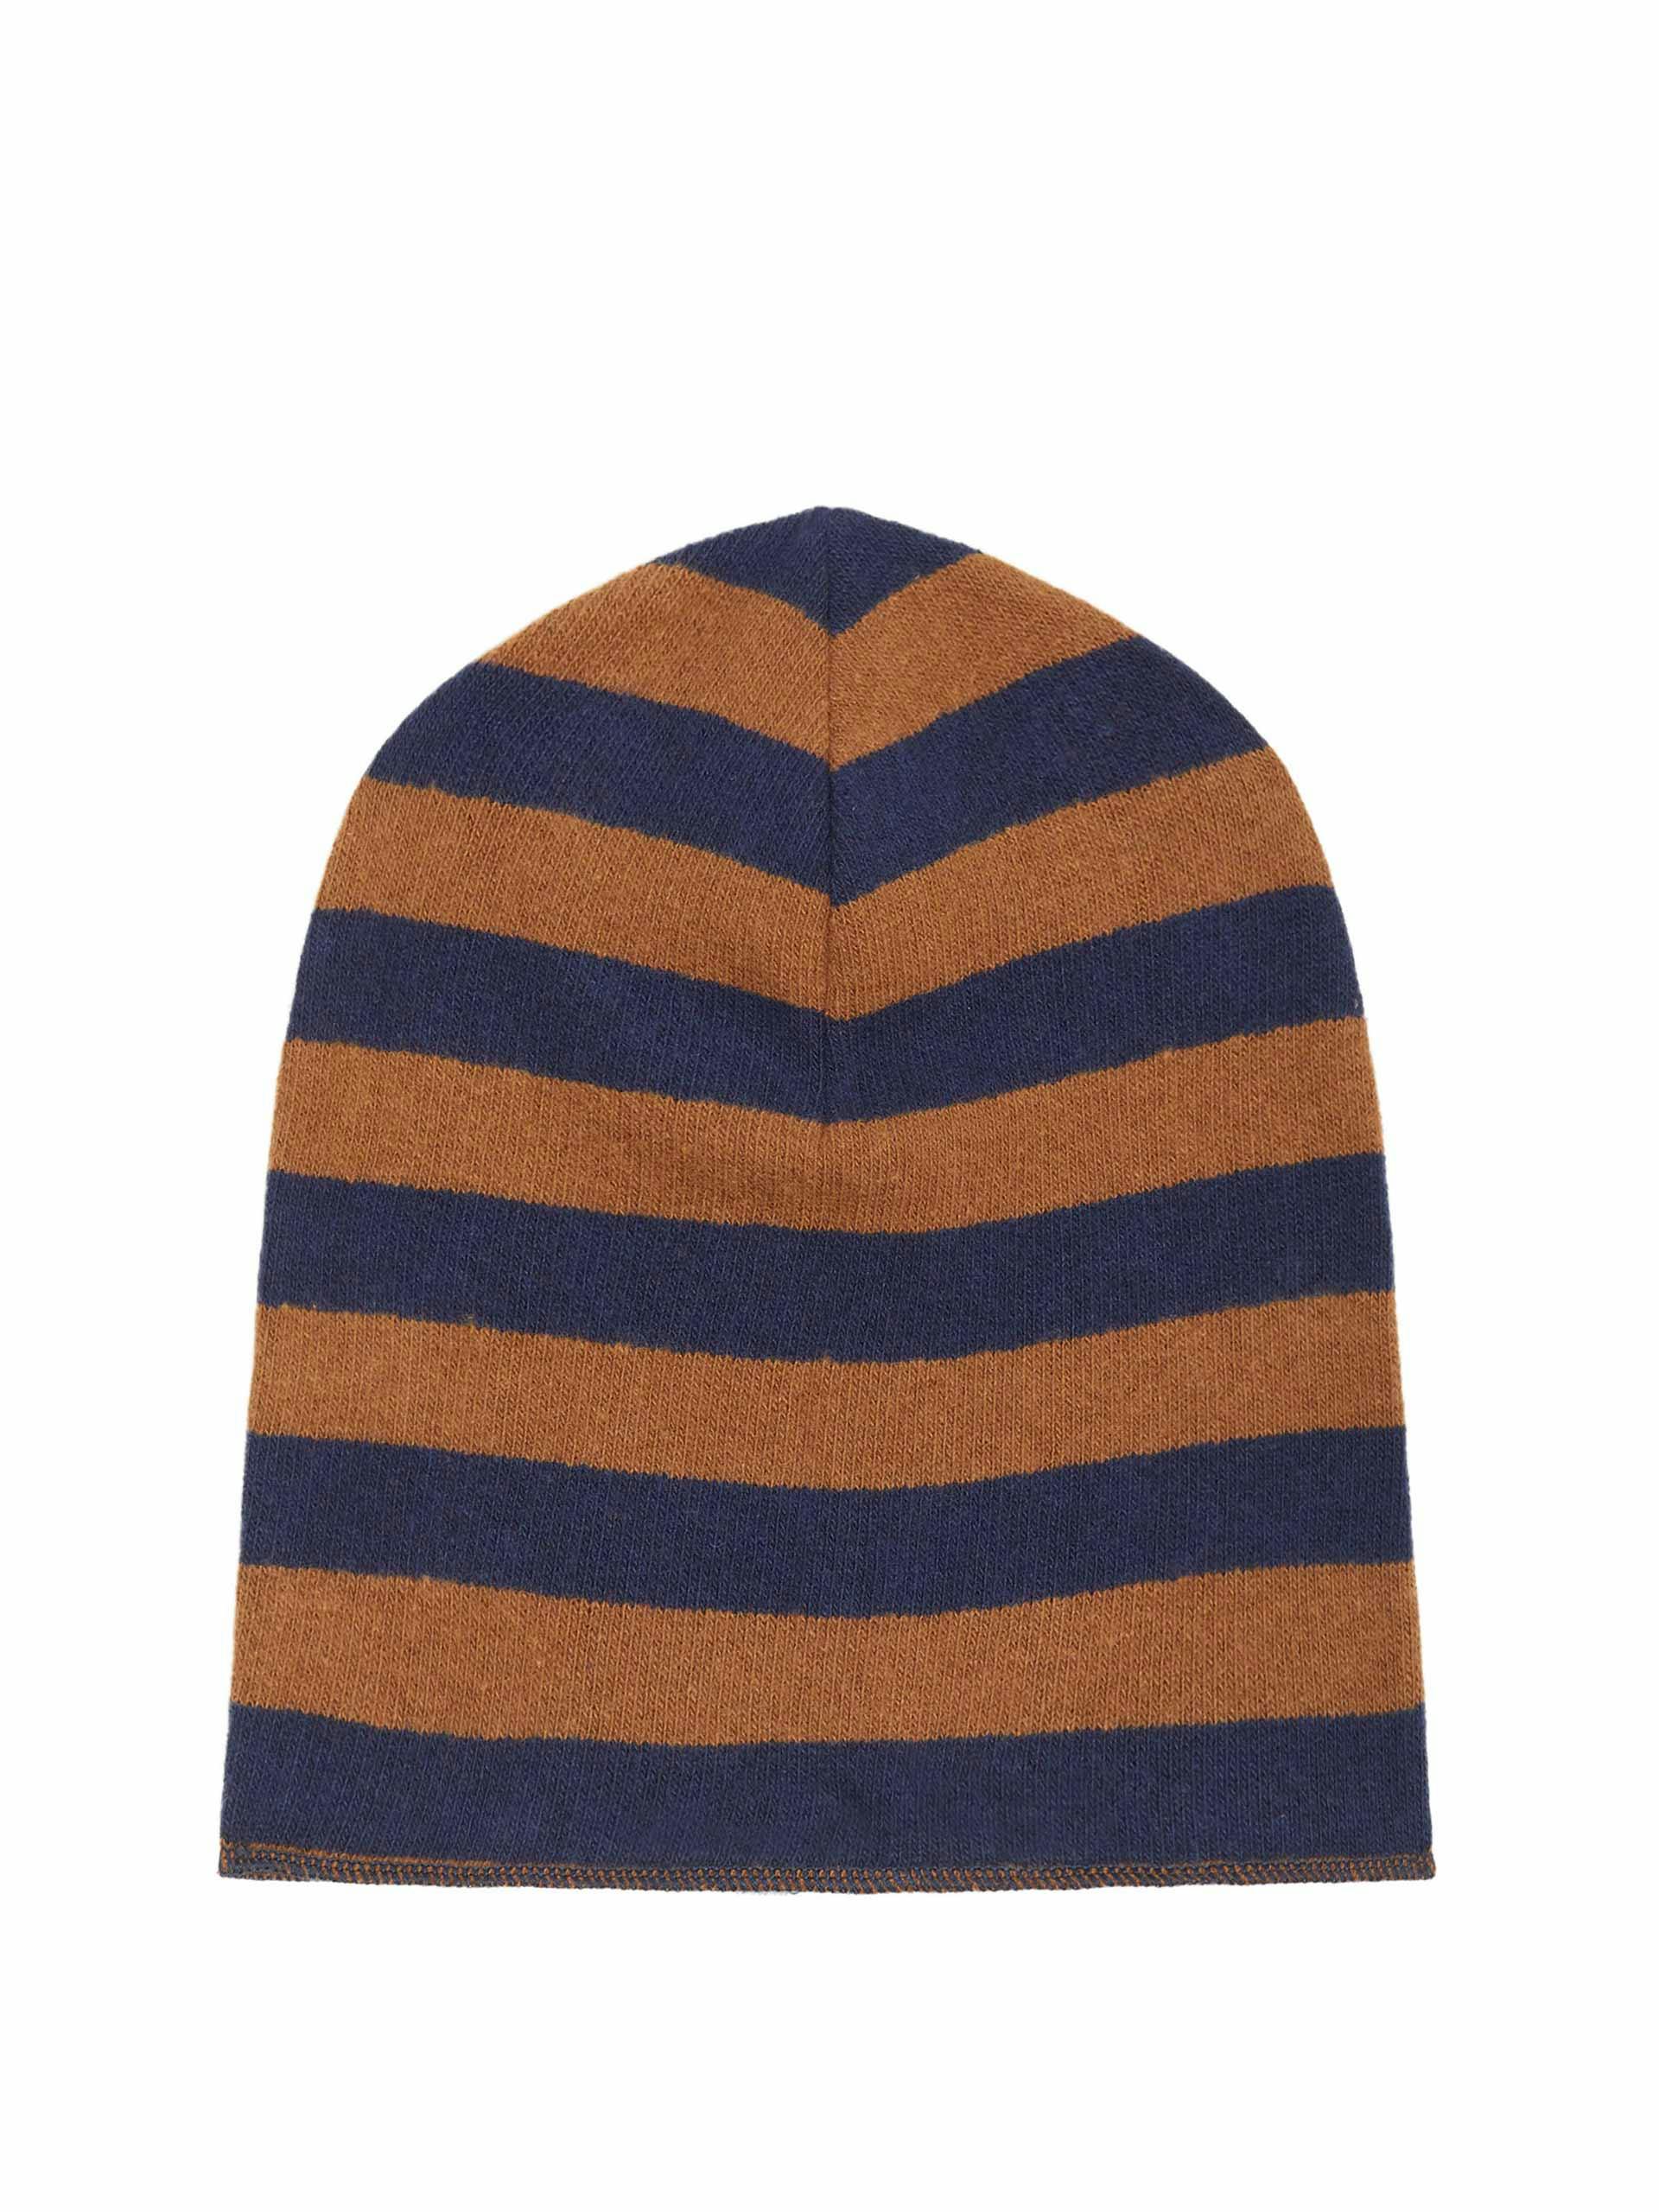 Striped knitted hat